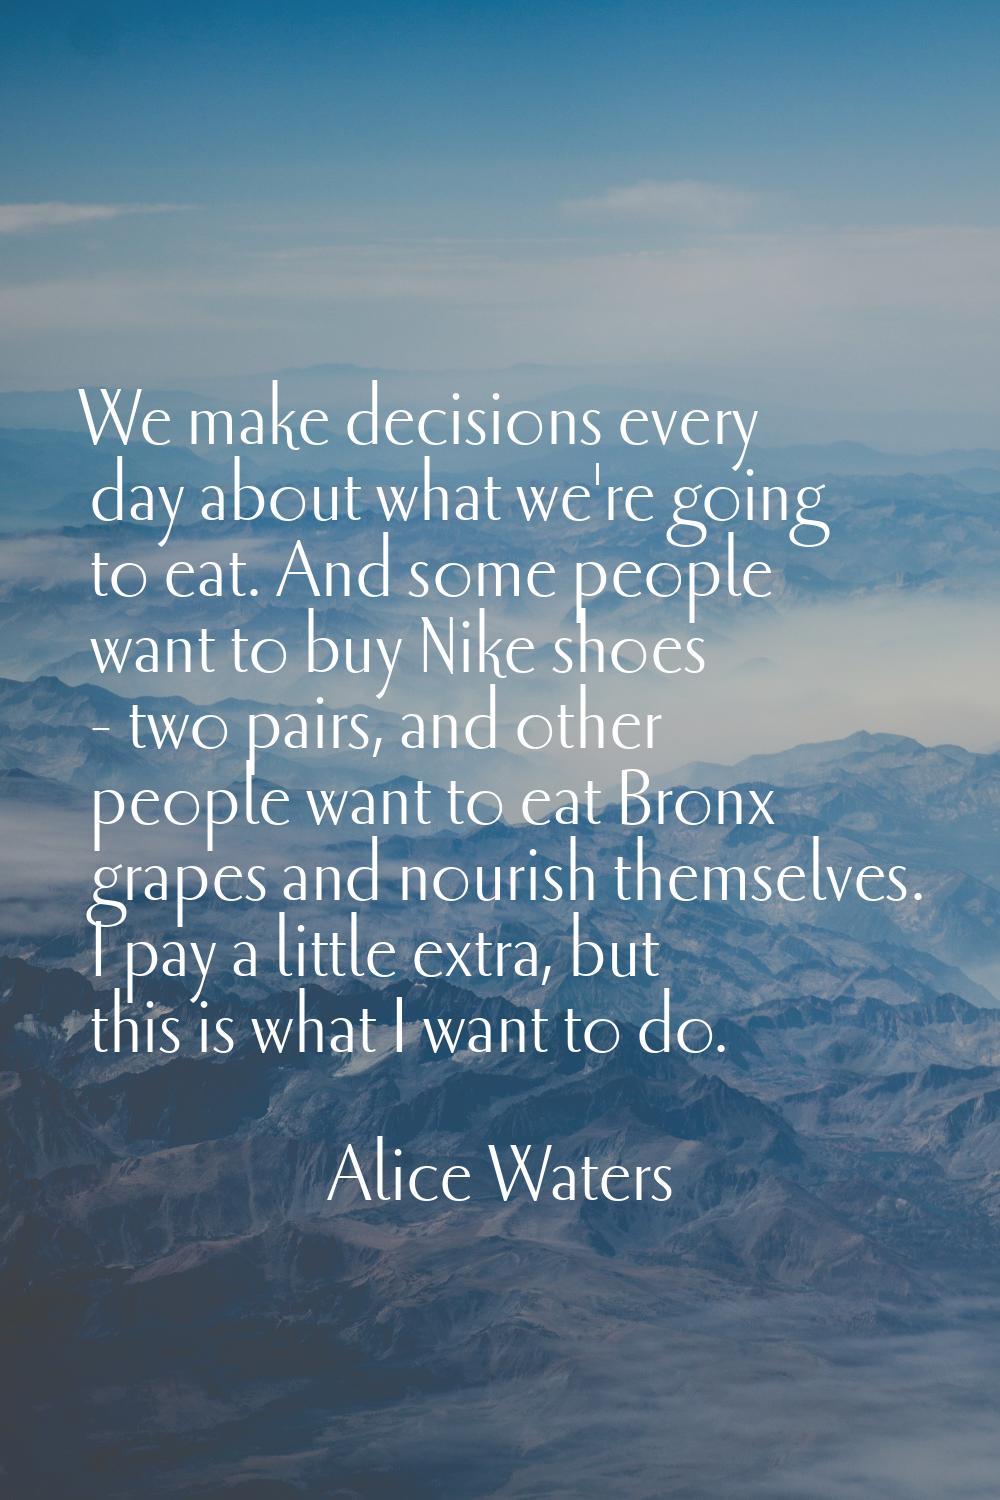 We make decisions every day about what we're going to eat. And some people want to buy Nike shoes -